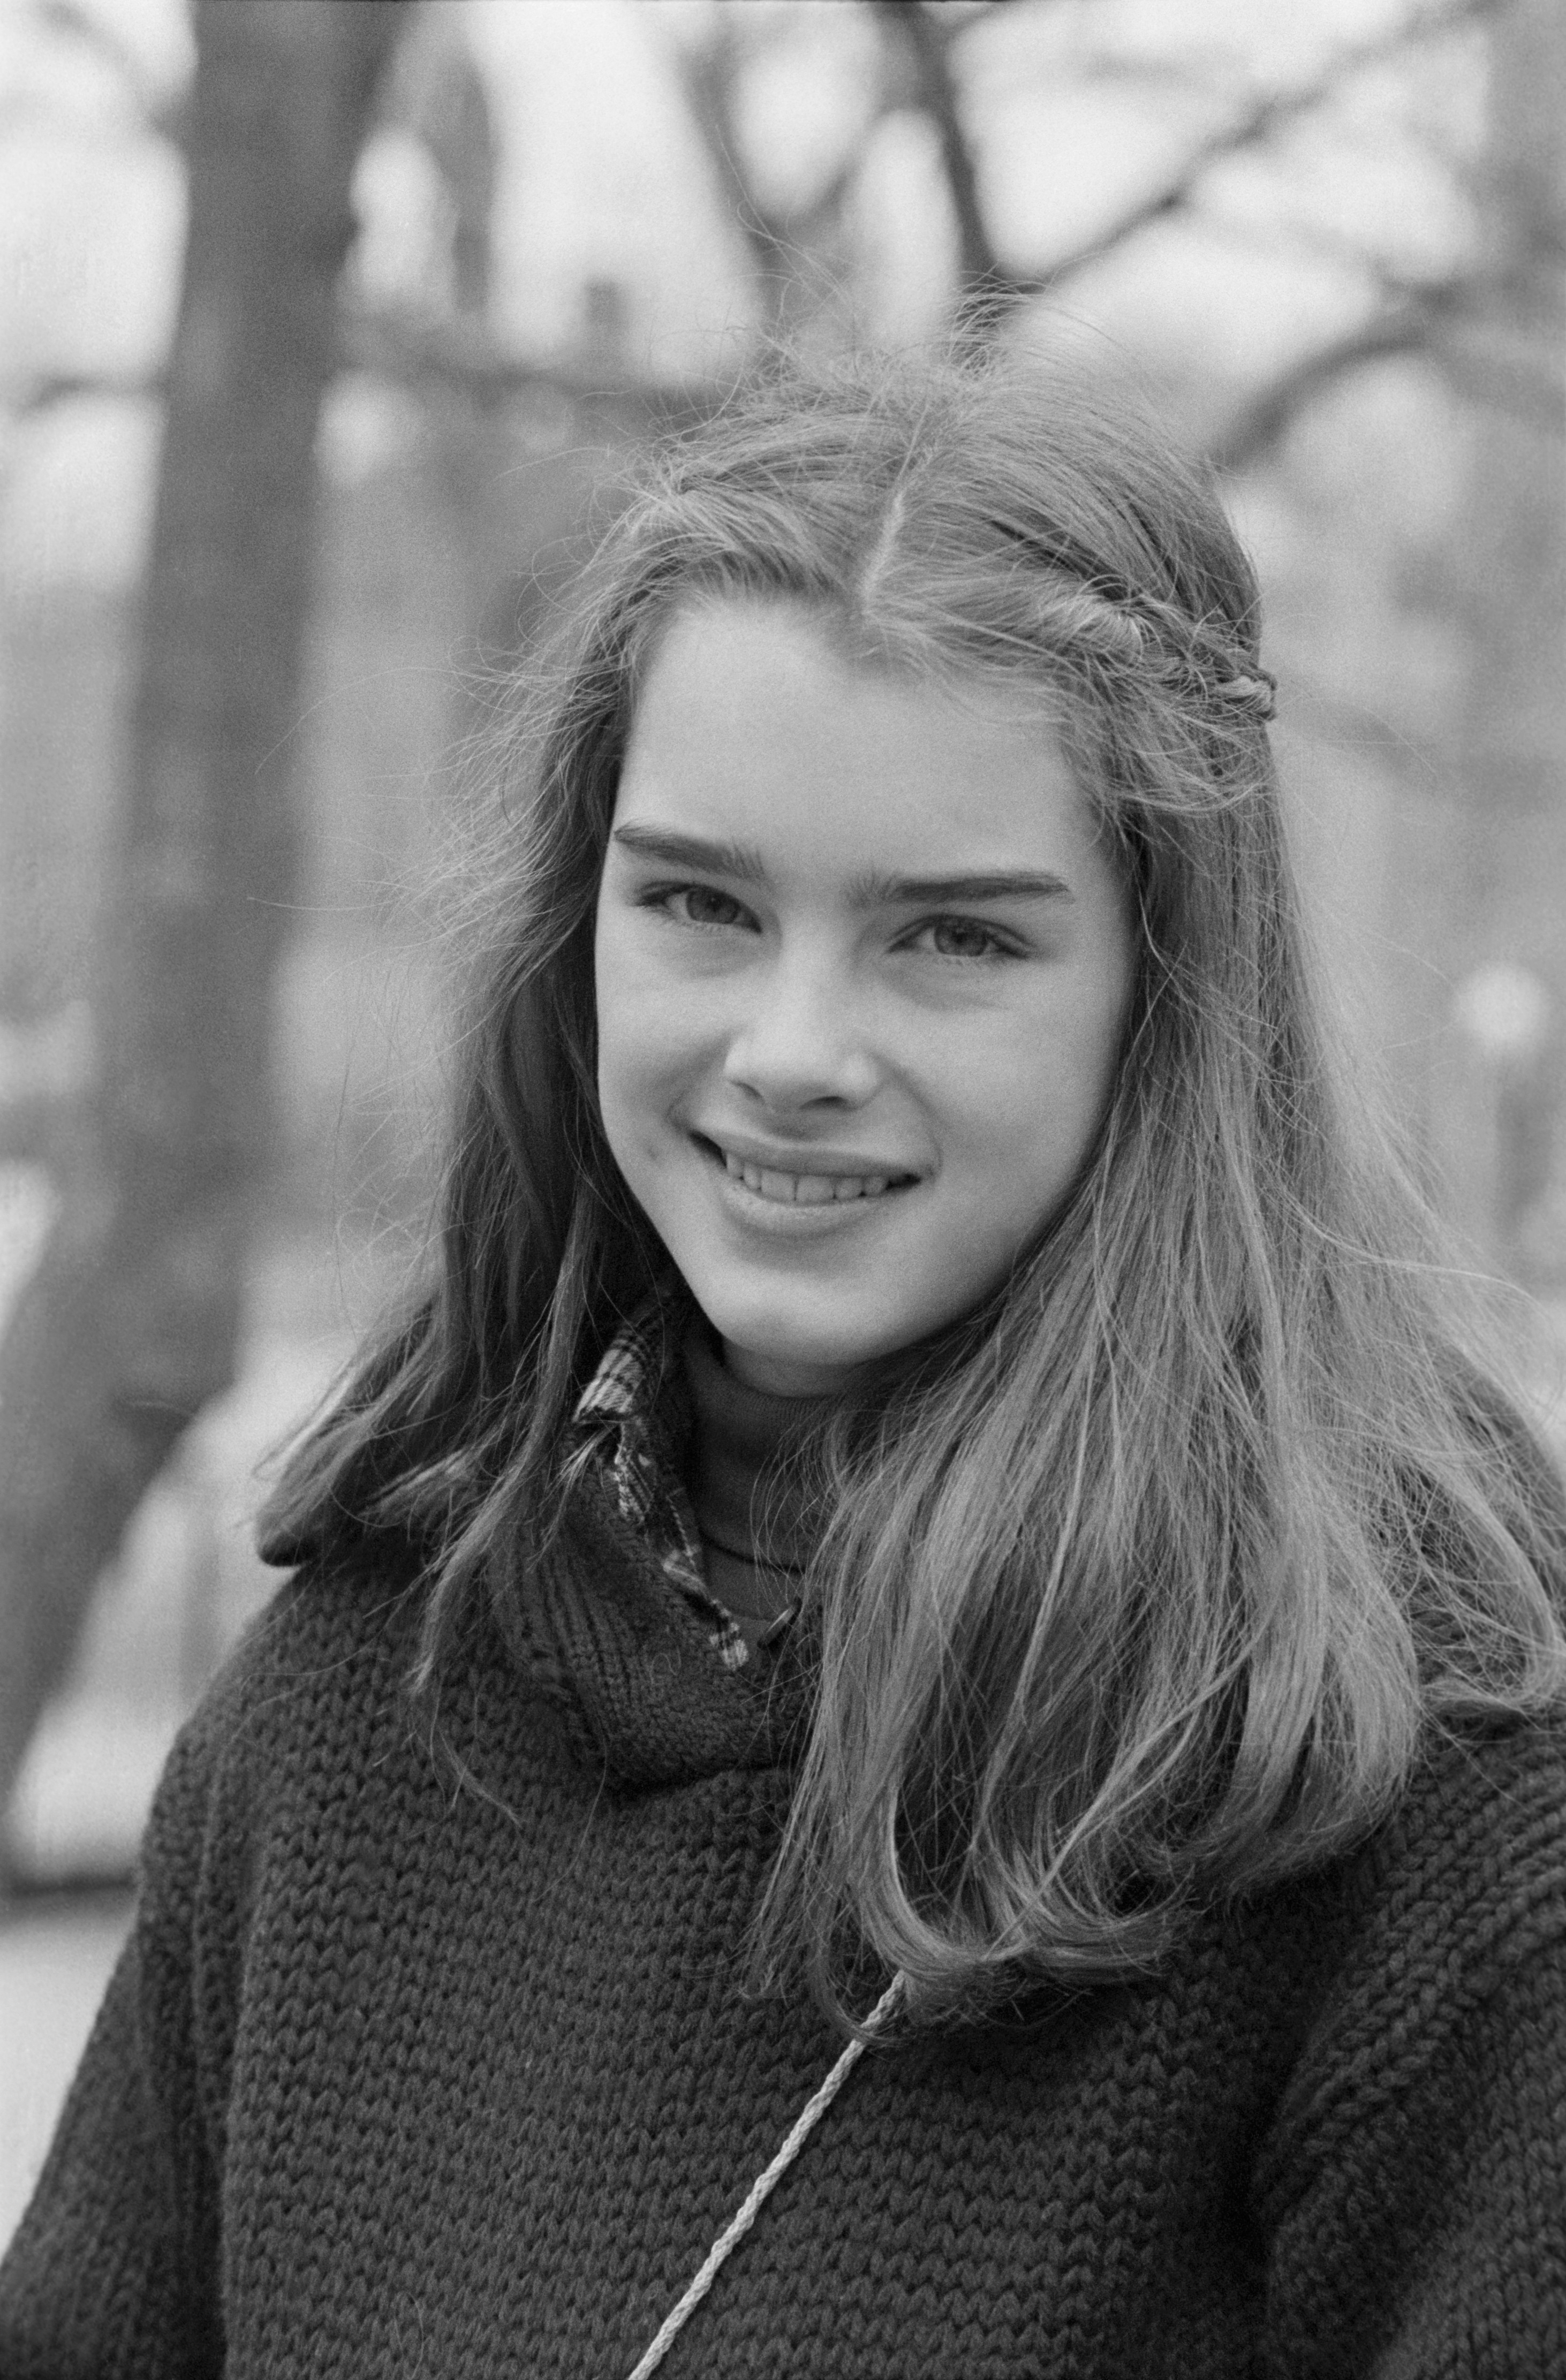 Brooke Shields in New York City am 03. April 1978 | Quelle: Getty Images